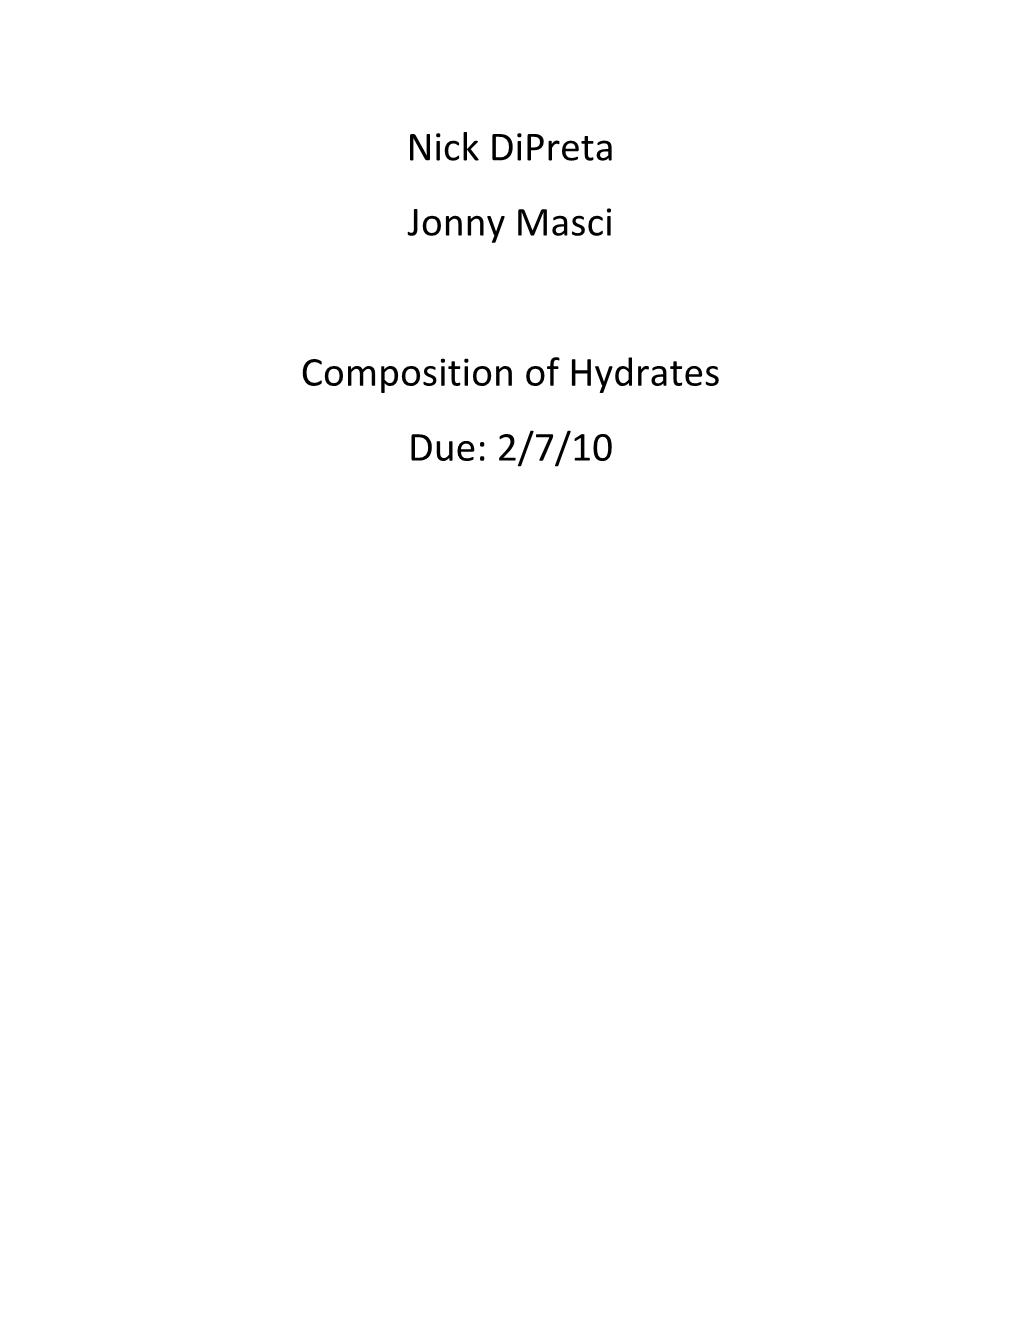 Composition of Hydrates